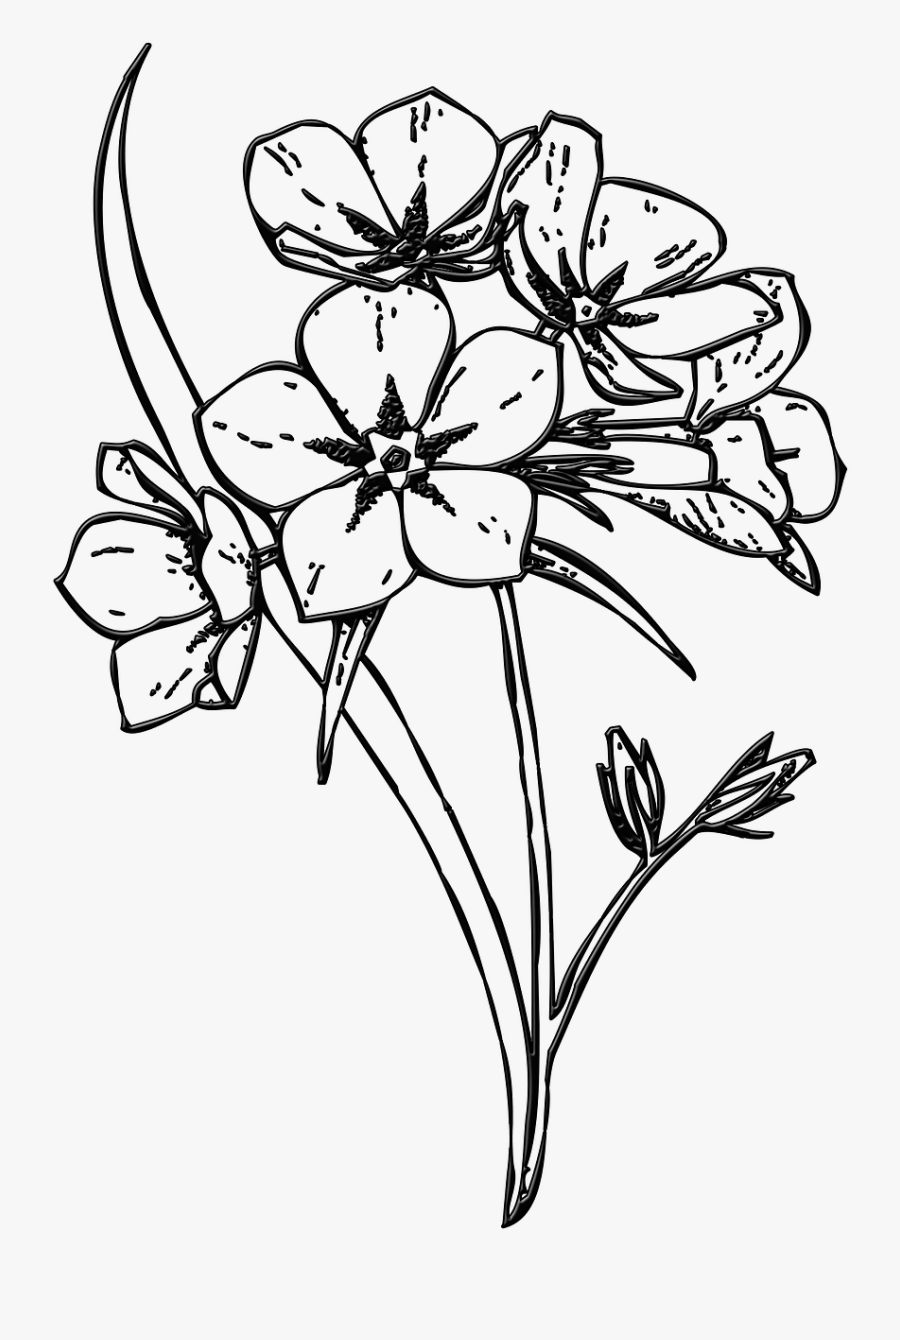 Flowers Illustration Black And White Png, Transparent Clipart